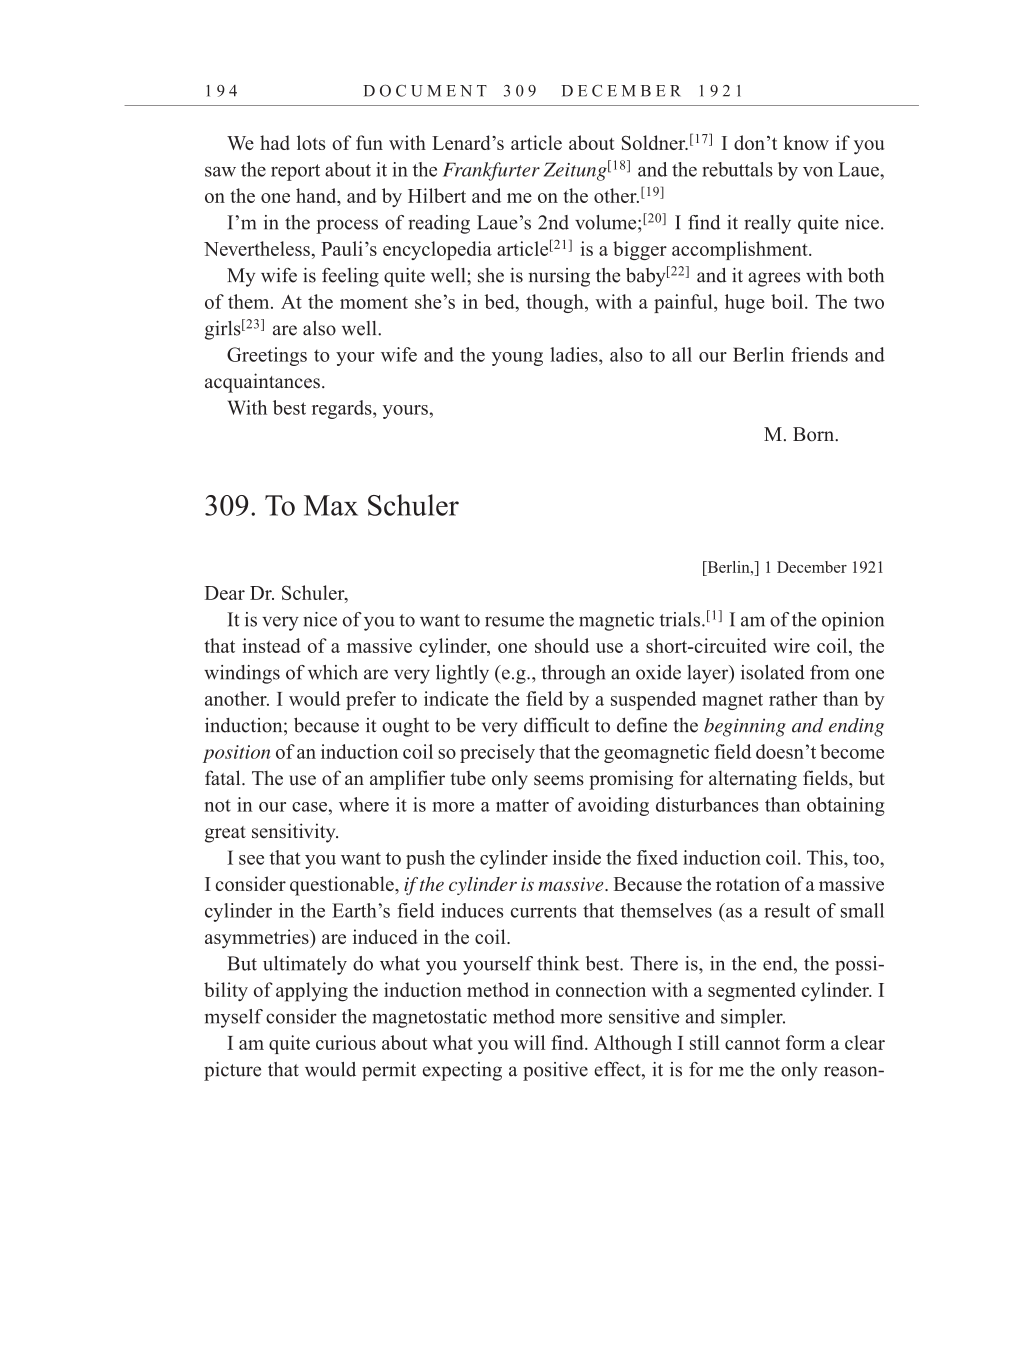 Volume 12: The Berlin Years: Correspondence, January-December 1921 (English translation supplement) page 194